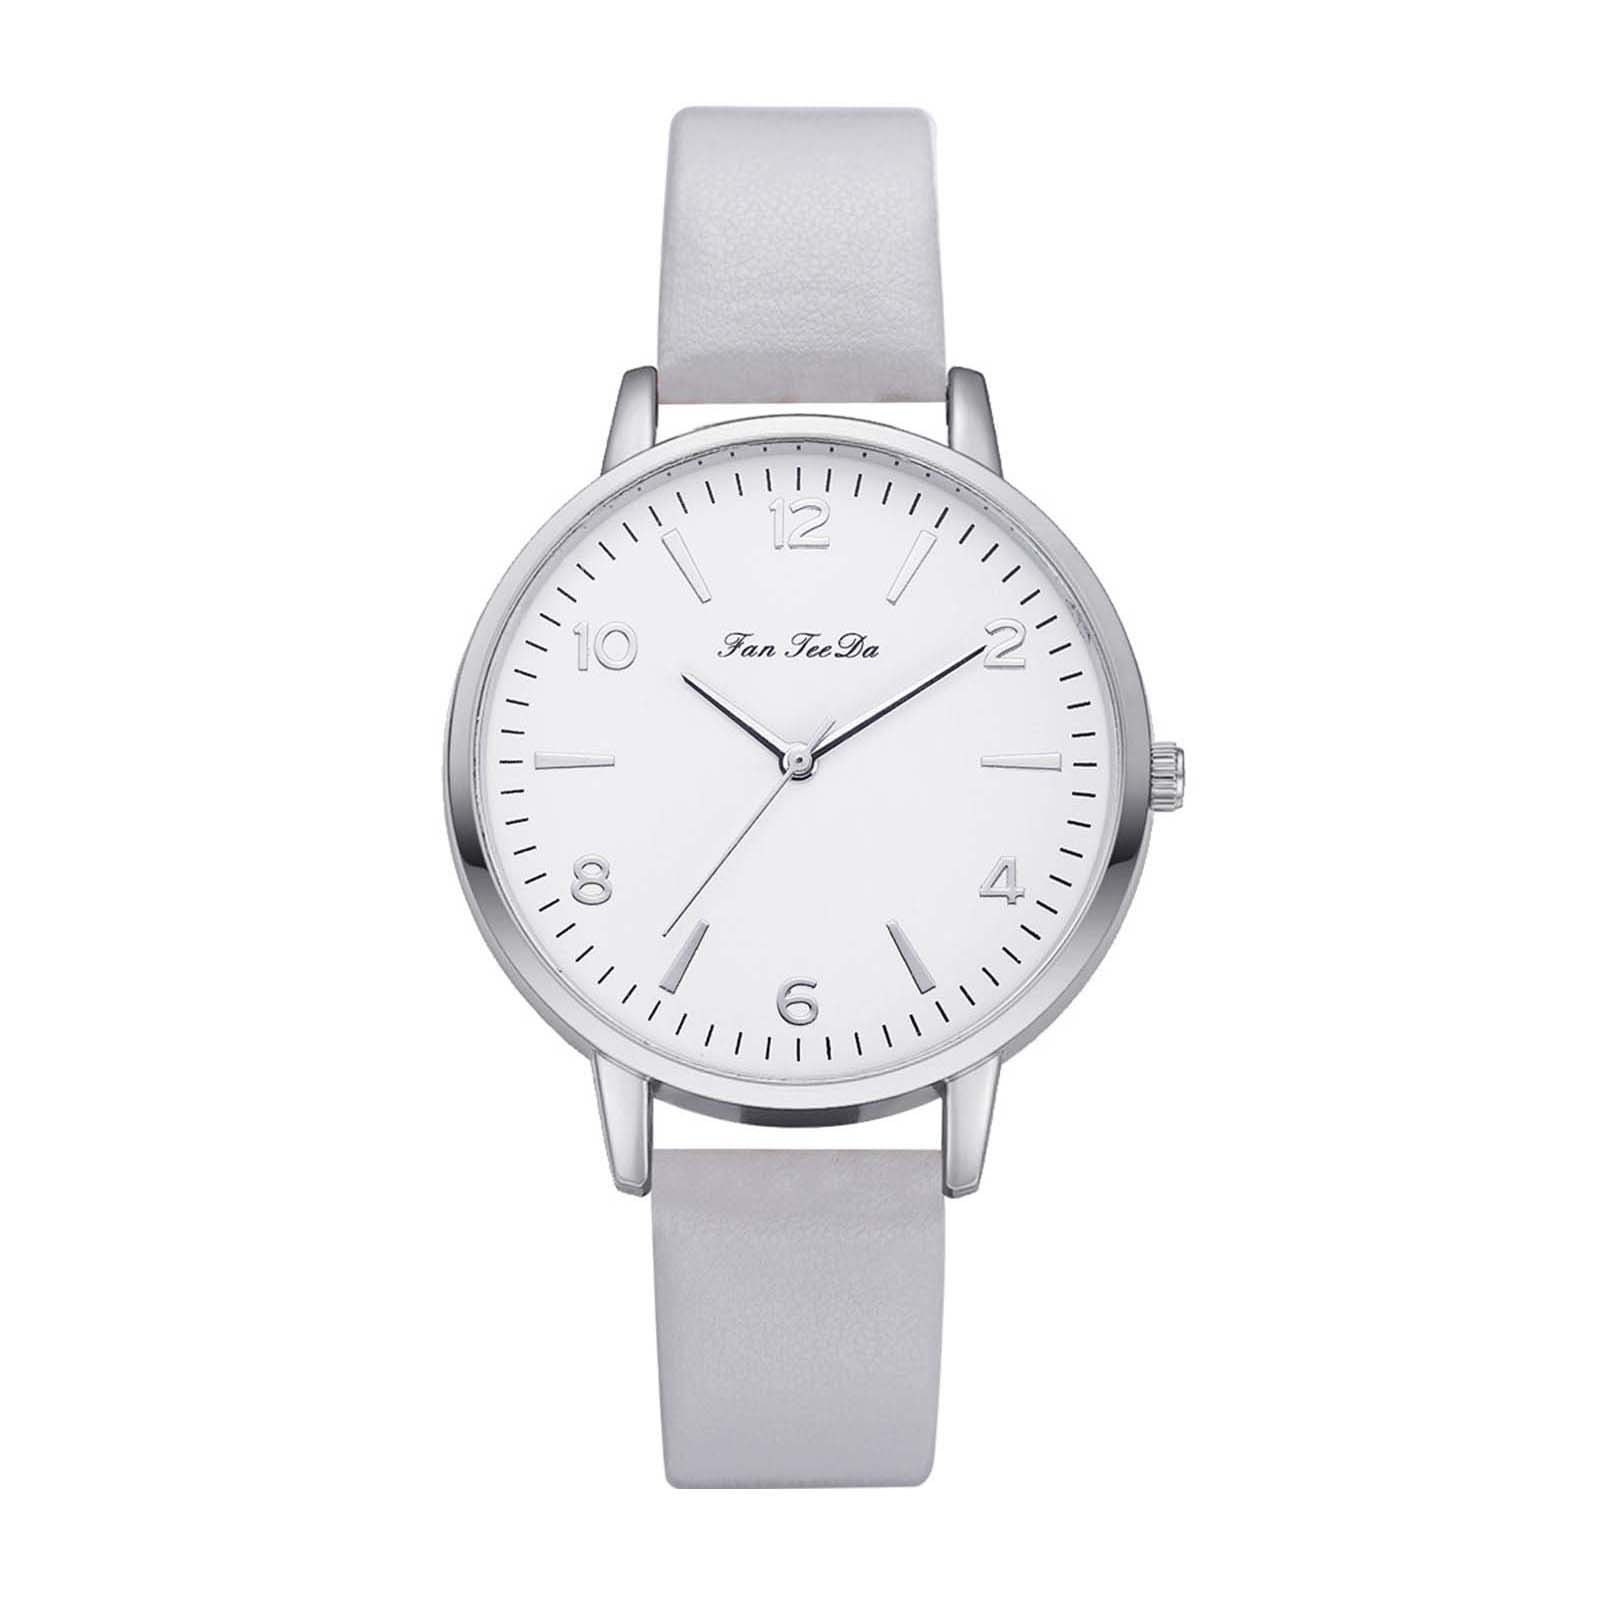 Holiday Savings Deals! Kukoosong Womens Watches Clearance Sale Prime Sleek  Minimalist Fashion With Strap Dial Womens Quartz Watch Gift Watch Ladies